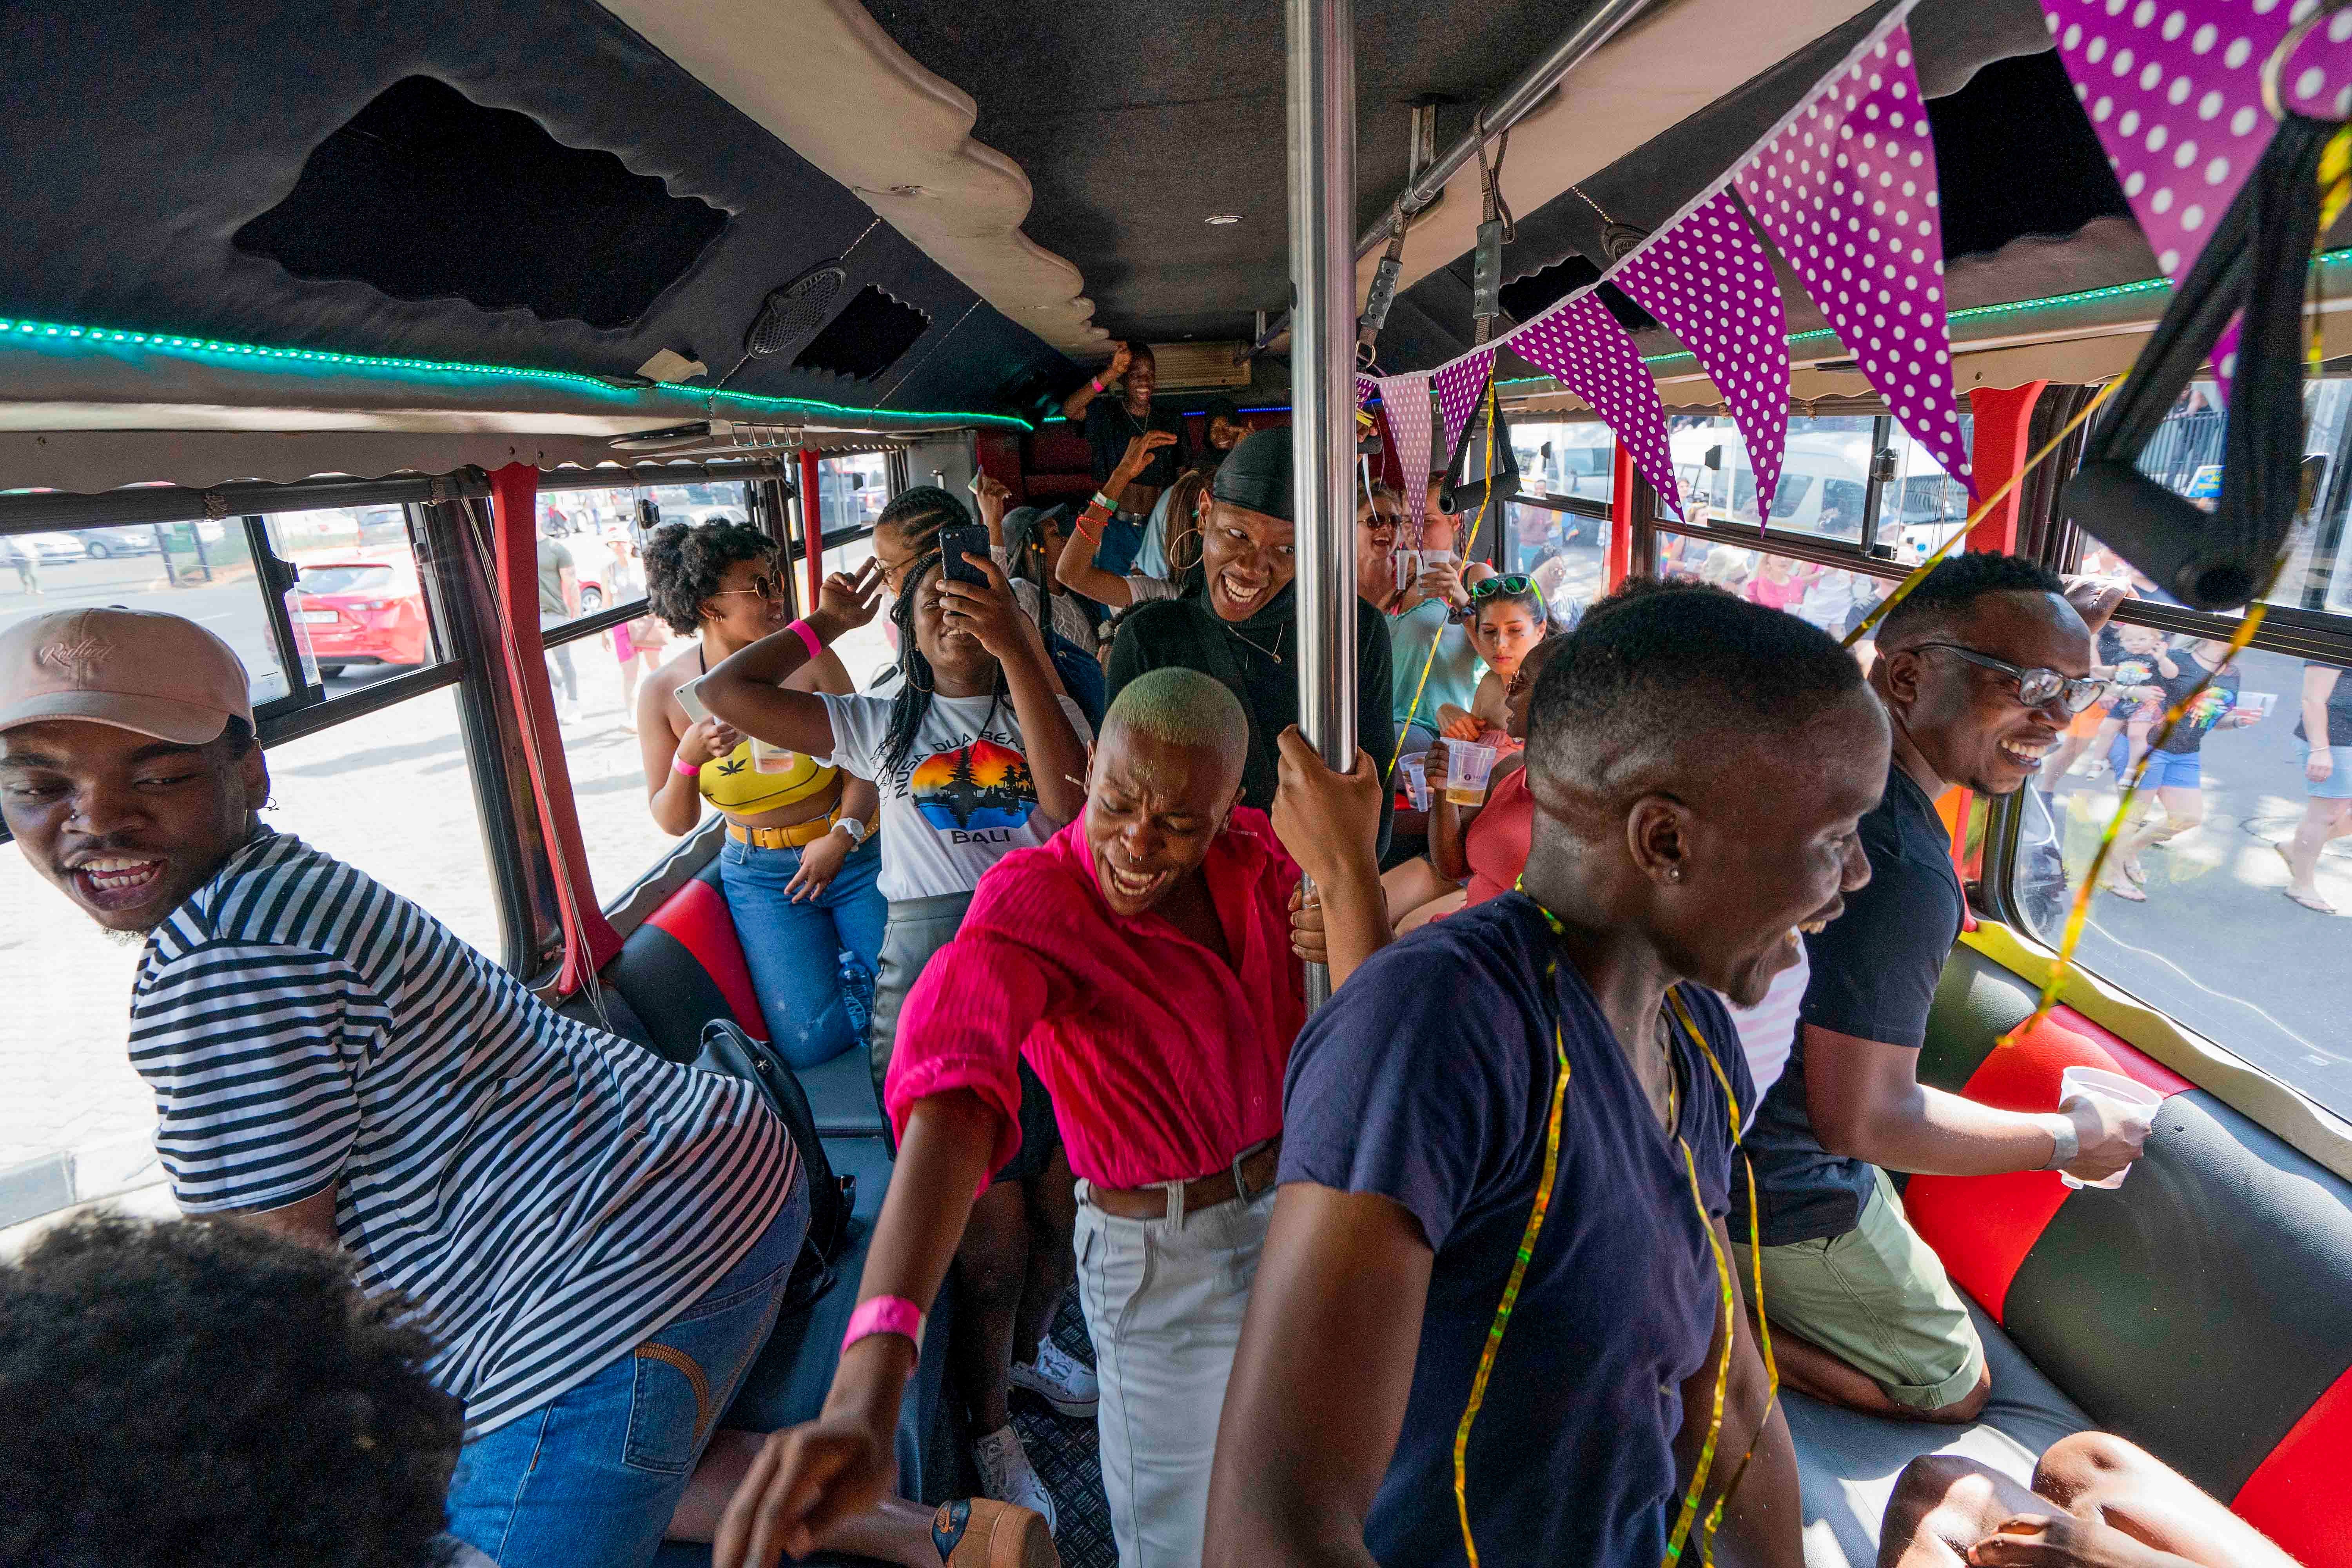 People on a bus among the thousands participating in the 30th Gay Pride event in Johannesburg, South Africa, October 26, 2019. ©2019 AP Photo/Jerome Delay